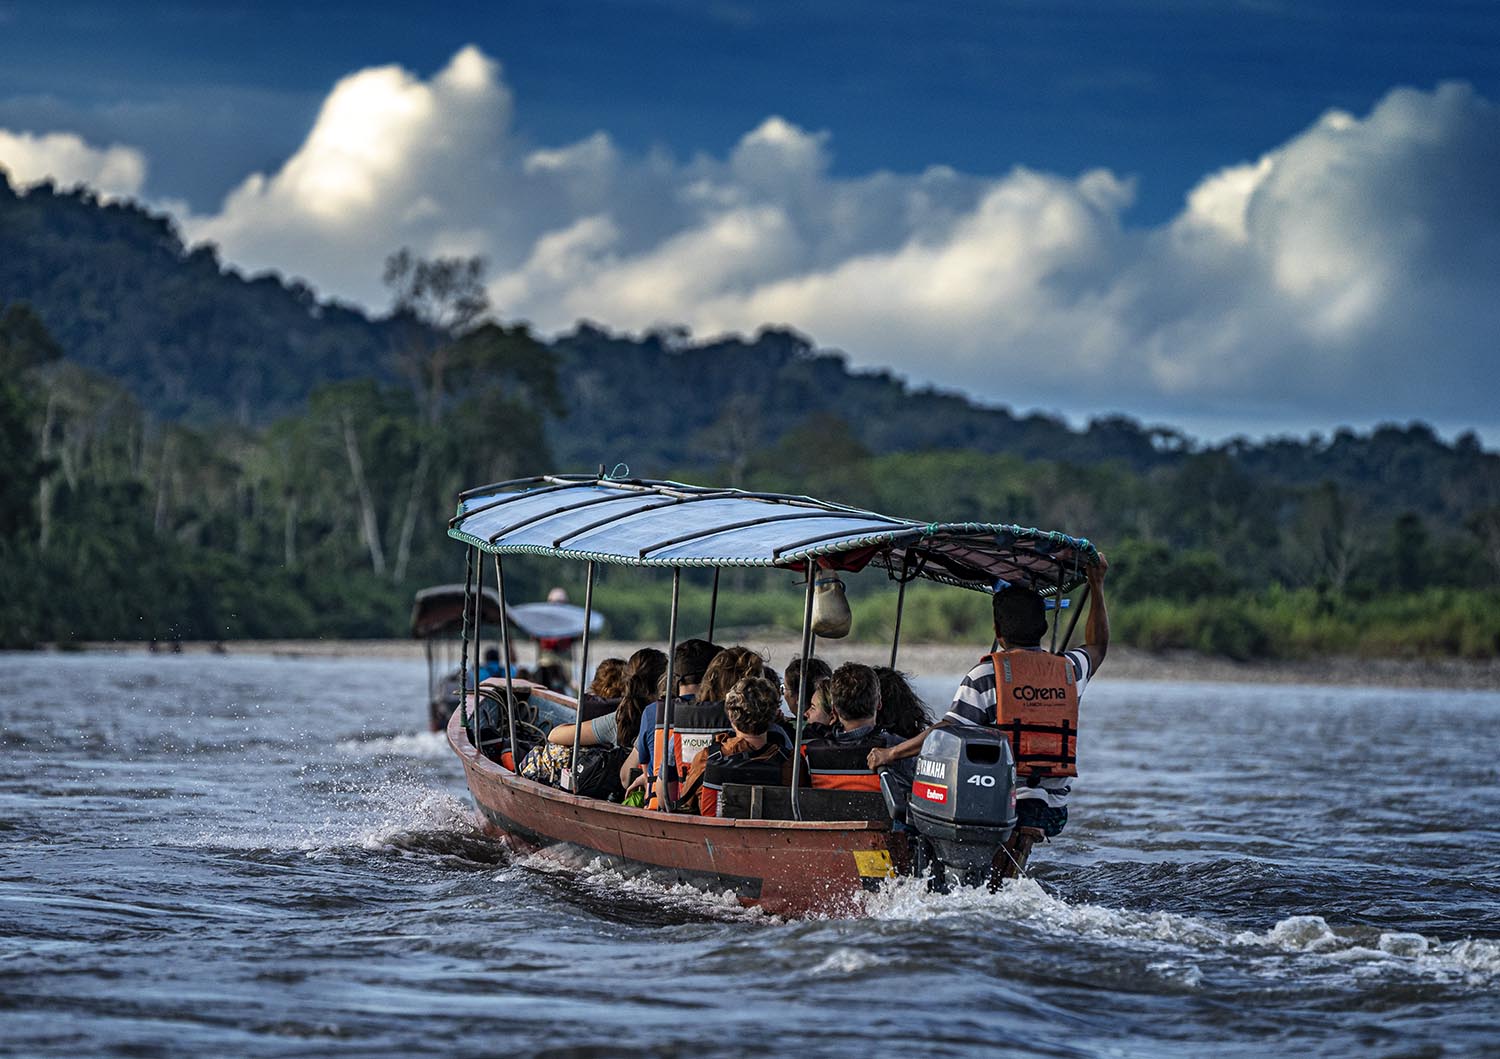 The Western group split across two motor boats, setting out on the Amazon river